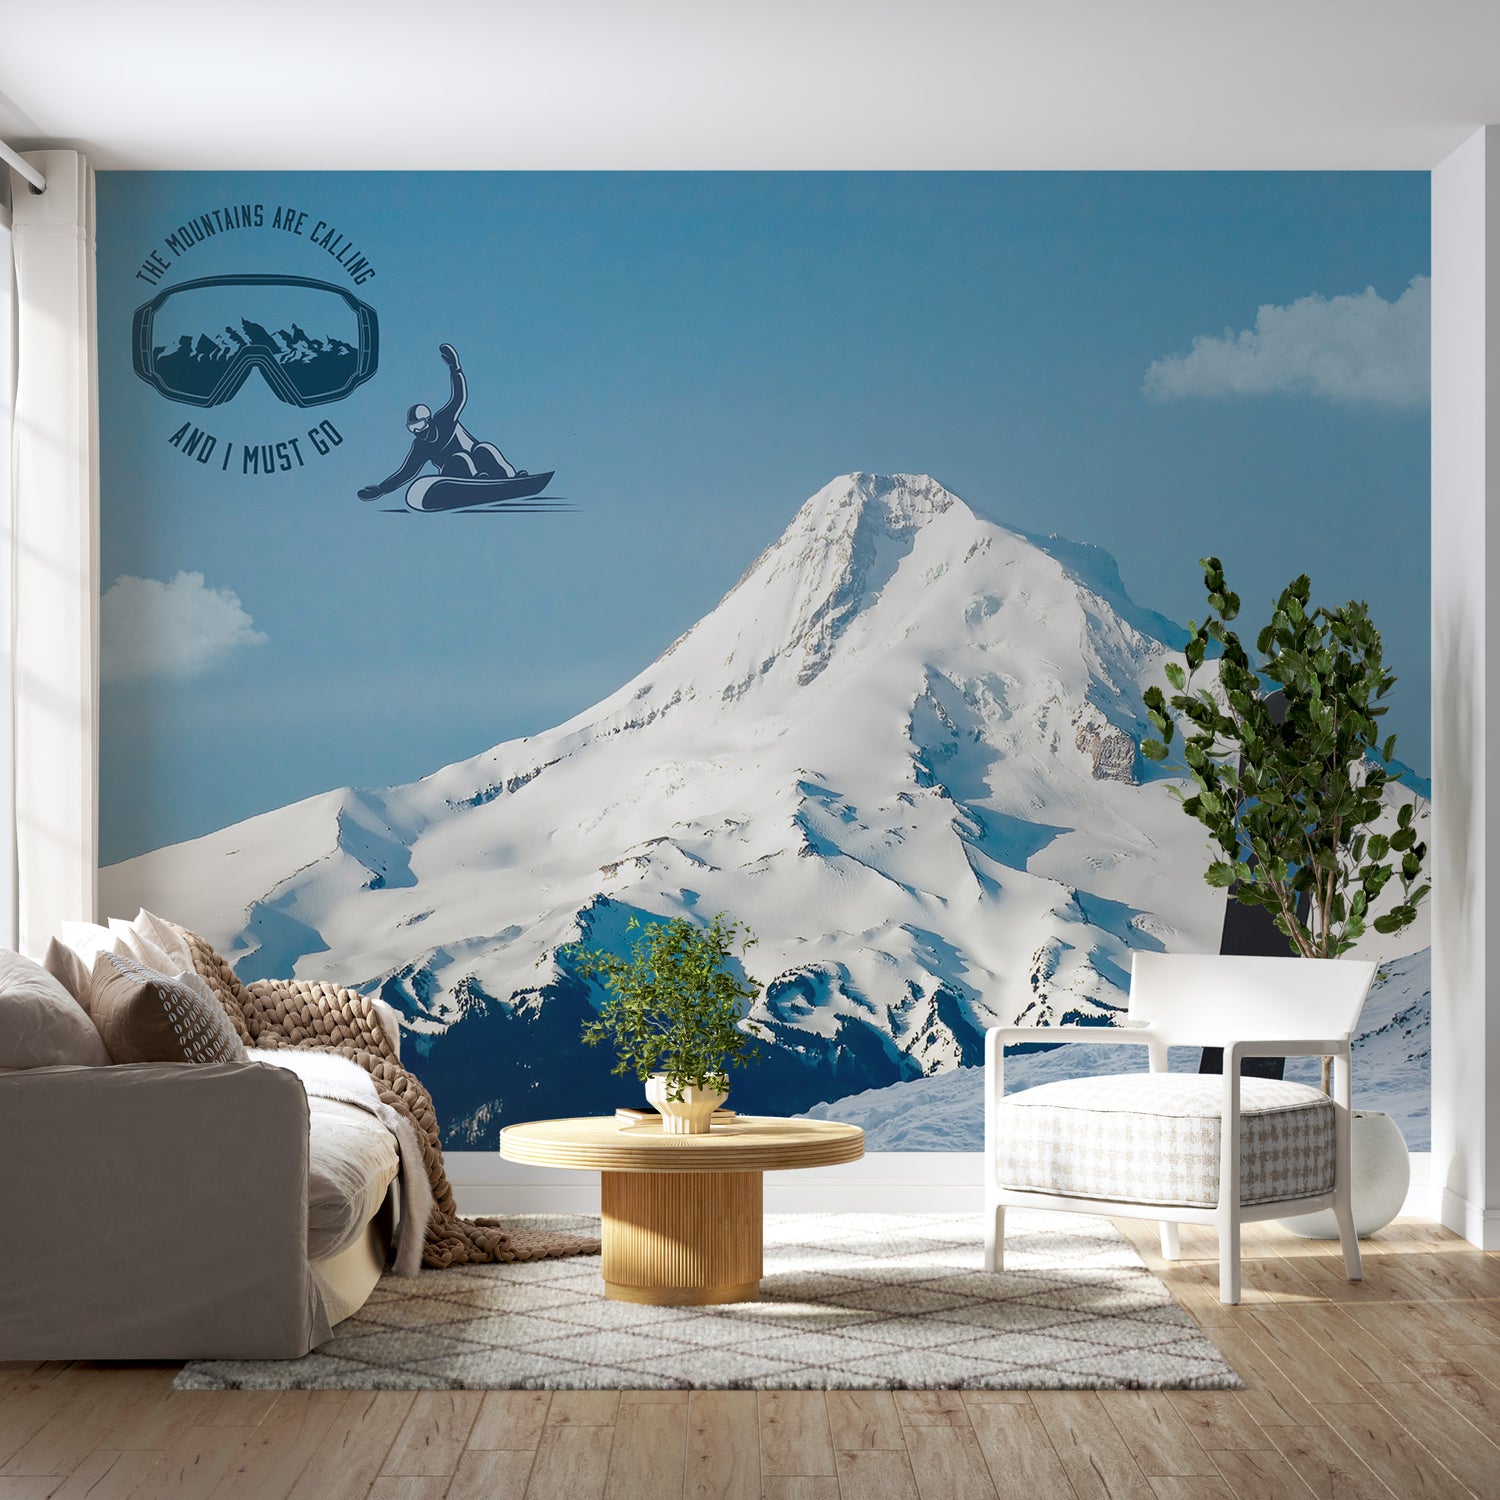 Peel & Stick Landscape Wall Mural - Snowboarding - Removable Wall Decals-Tiptophomedecor